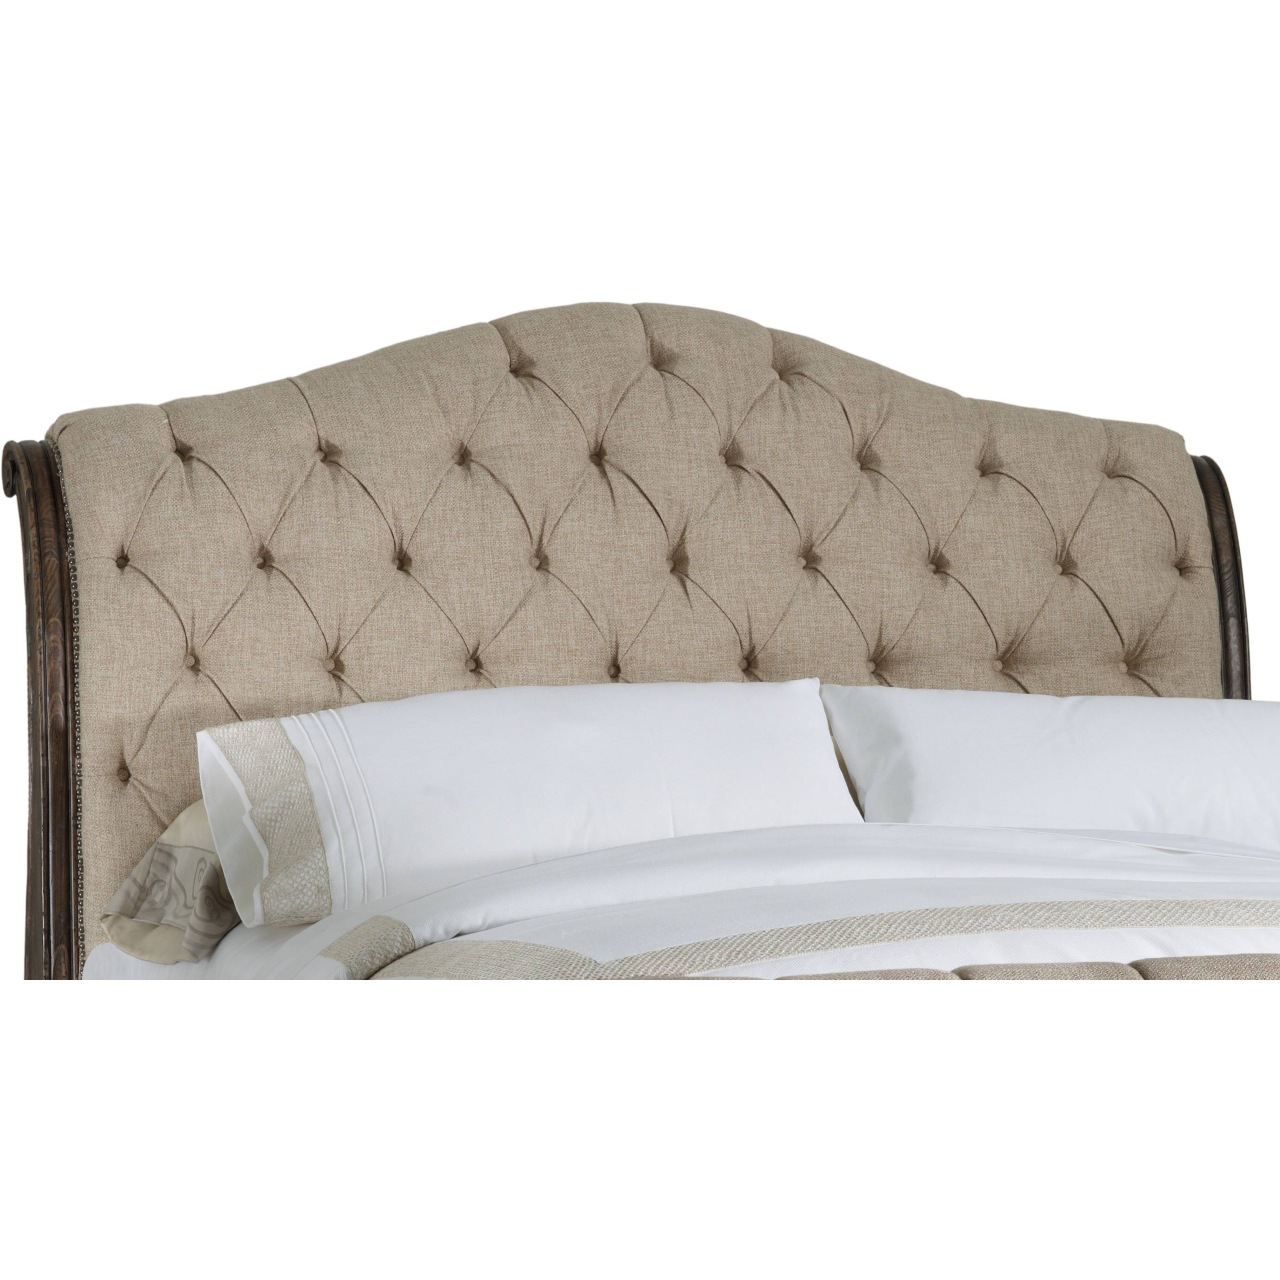 Robinson Tufted Bed - Ecru Fabric - Exquisite Living